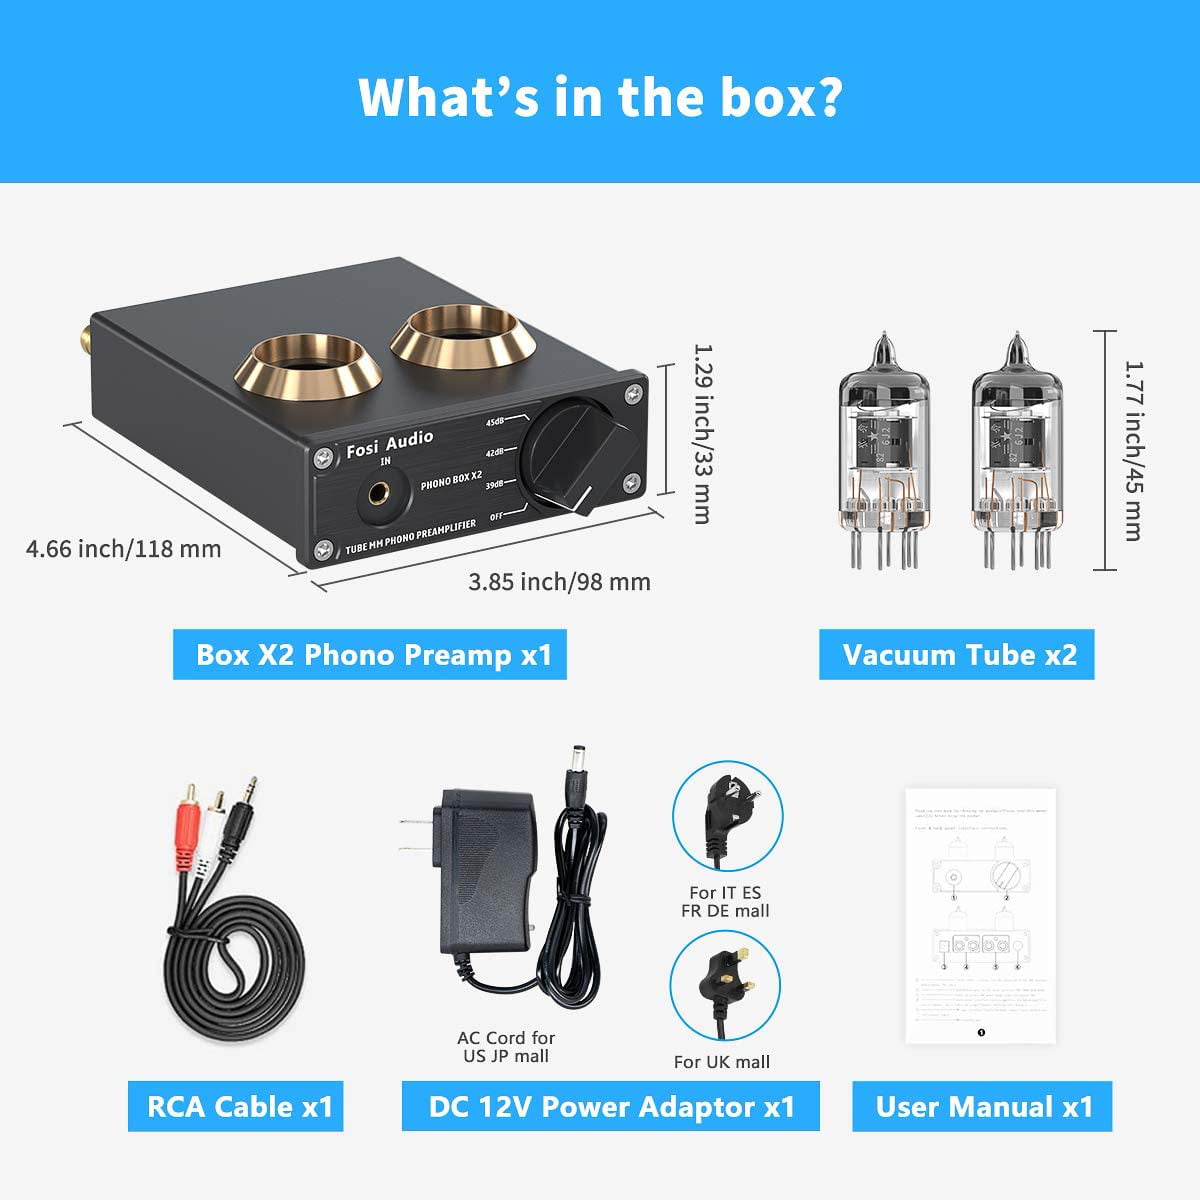 Phono Preamp for Turntable Pre Amp Amplifier MM Phonograph Preamplifier for Record Player with Volume Control Mini Stereo Audio Hi-Fi Pre-Amplifier with DC 12V Power Adapter Fosi Audio Box X1